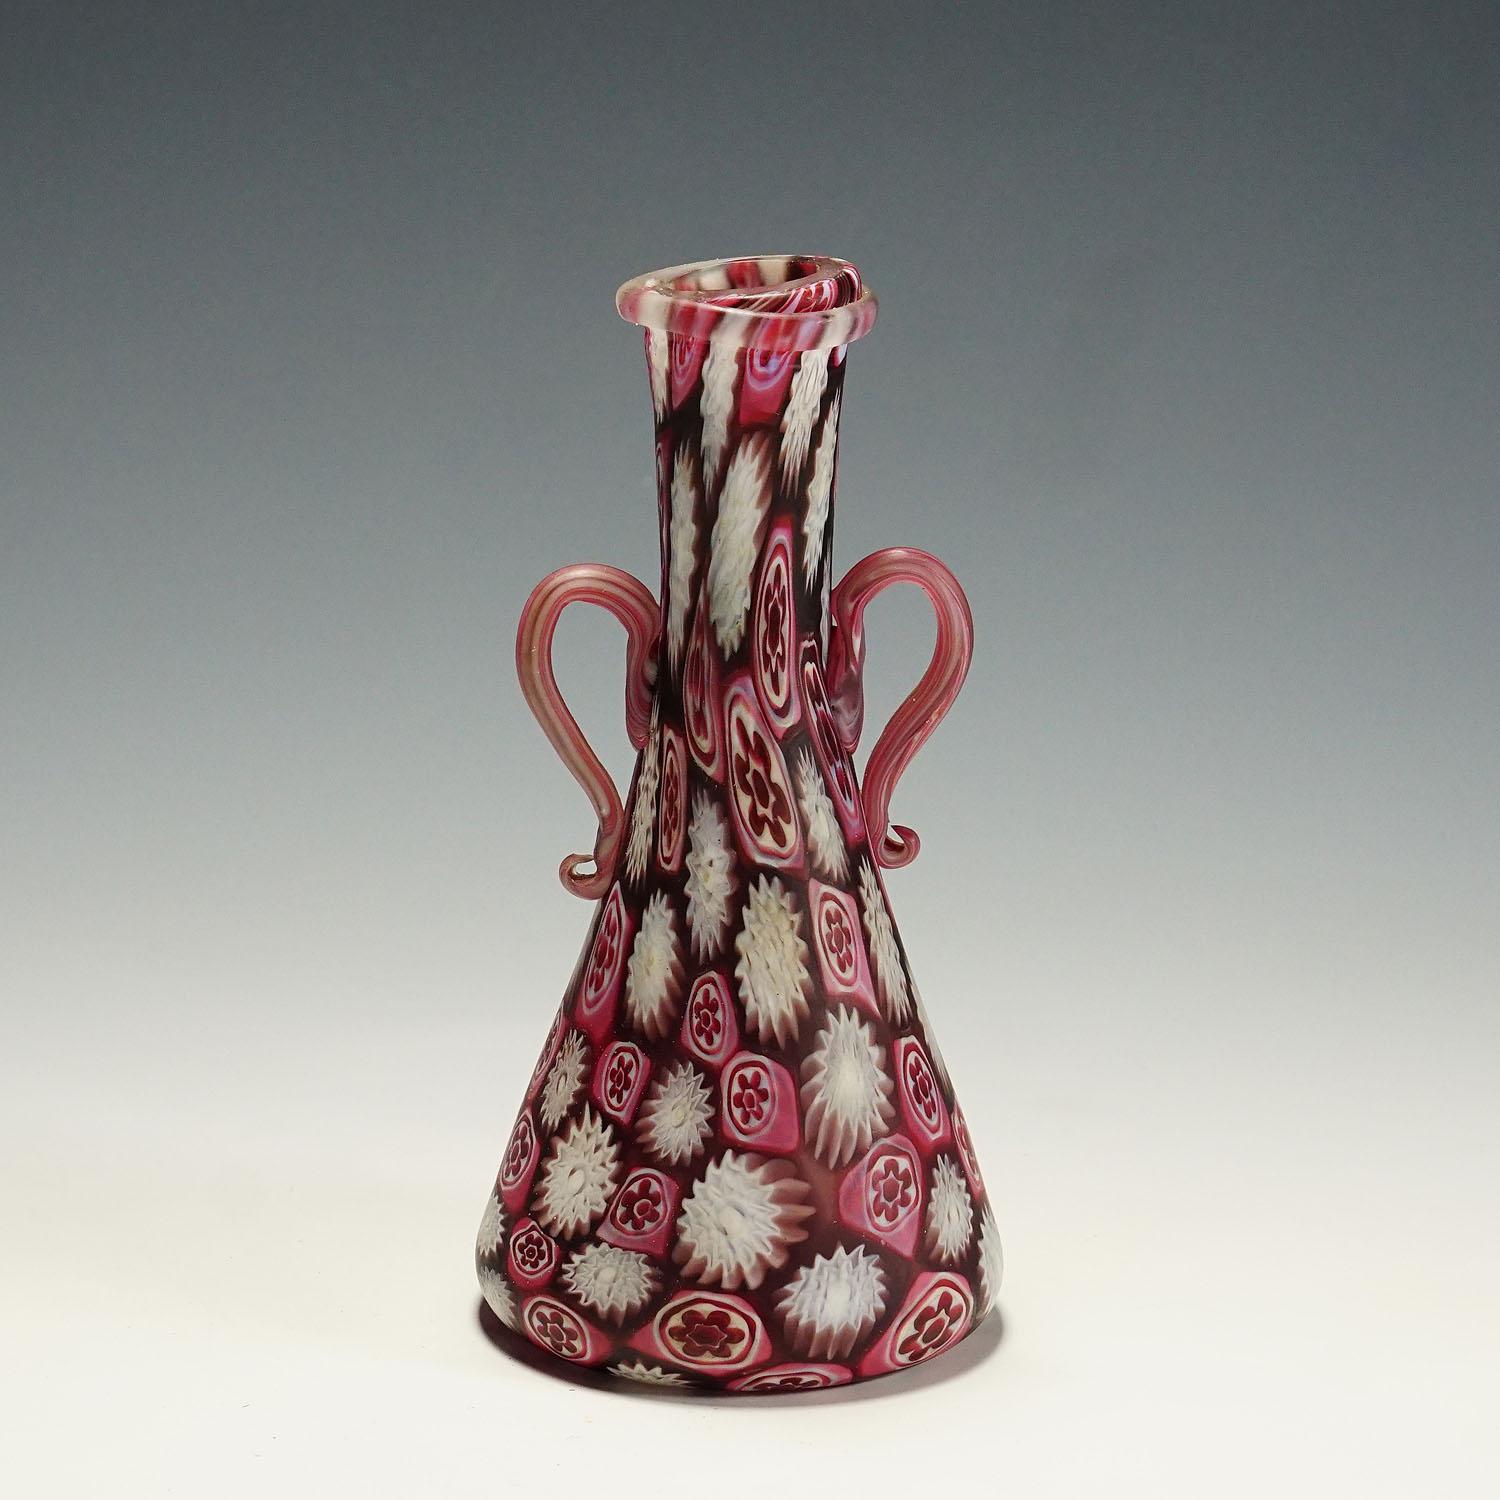 Antique red and white Fratelli Toso Millefiori vase, Murano circa 1910

A large Millefiore murrine glass vase, manufactured by Vetreria Fratelli Toso, Murano around 1910. Manufactured with polychrome murrines in pink, red and white and an acid